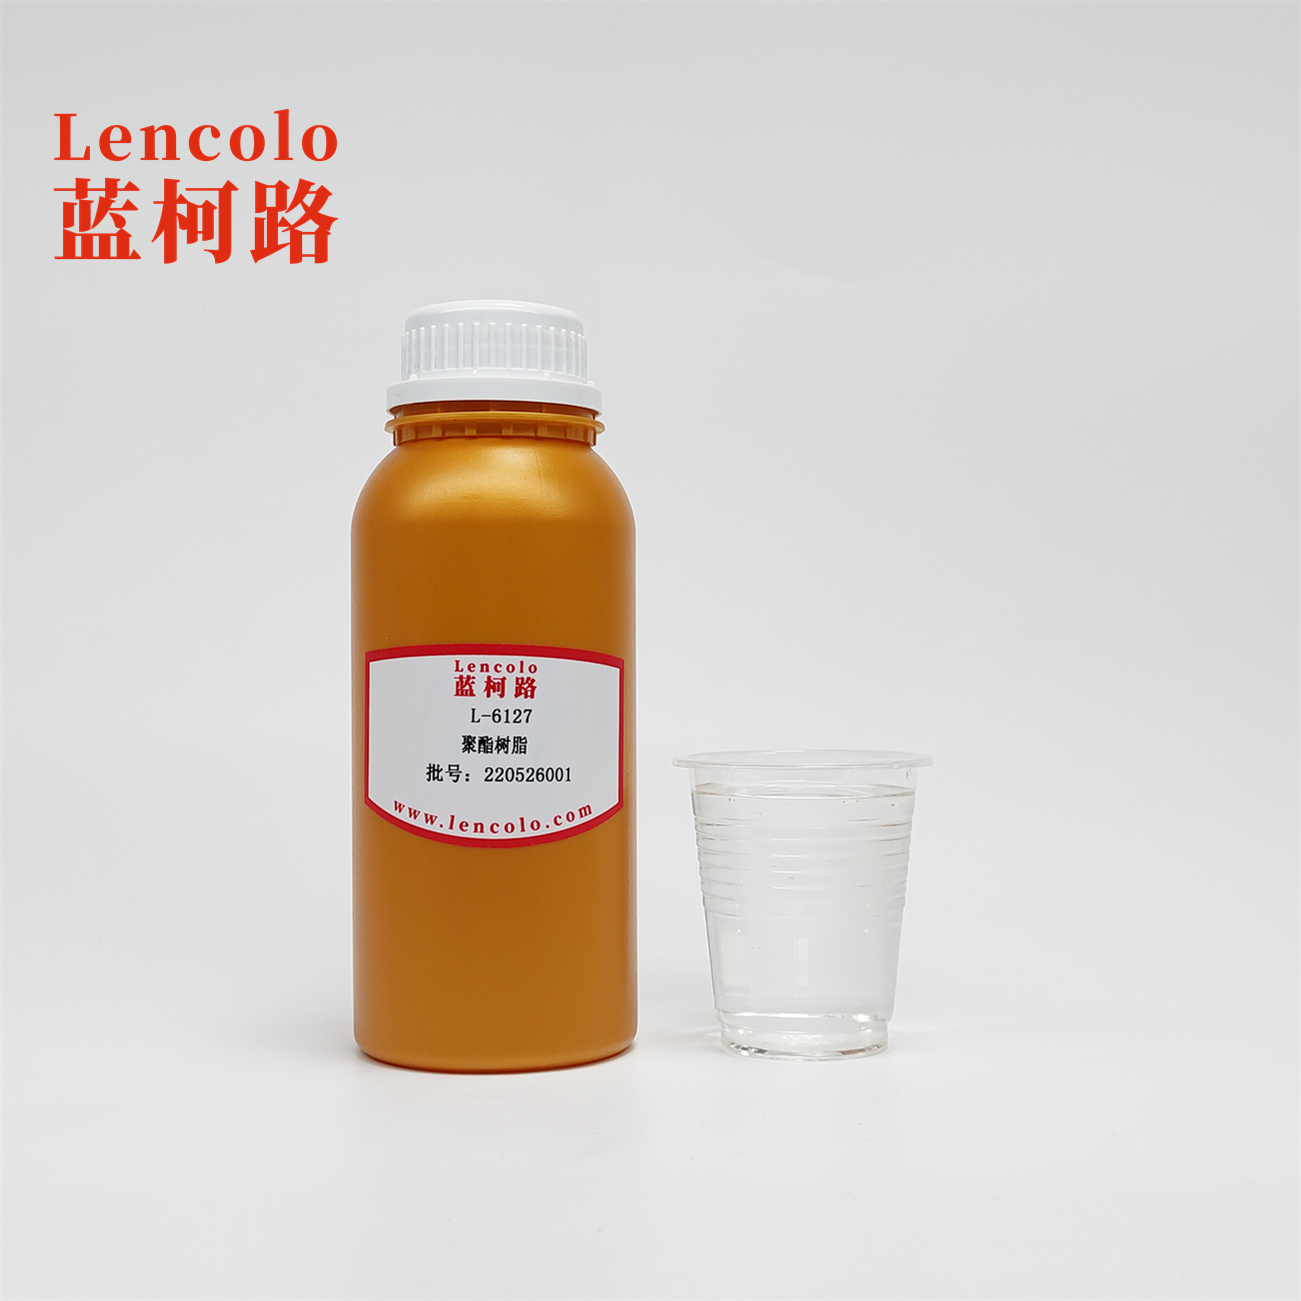 L-6127 Low viscosity 8-functional hyperbranched polyester resin with low viscosity used in UV high-gloss varnish